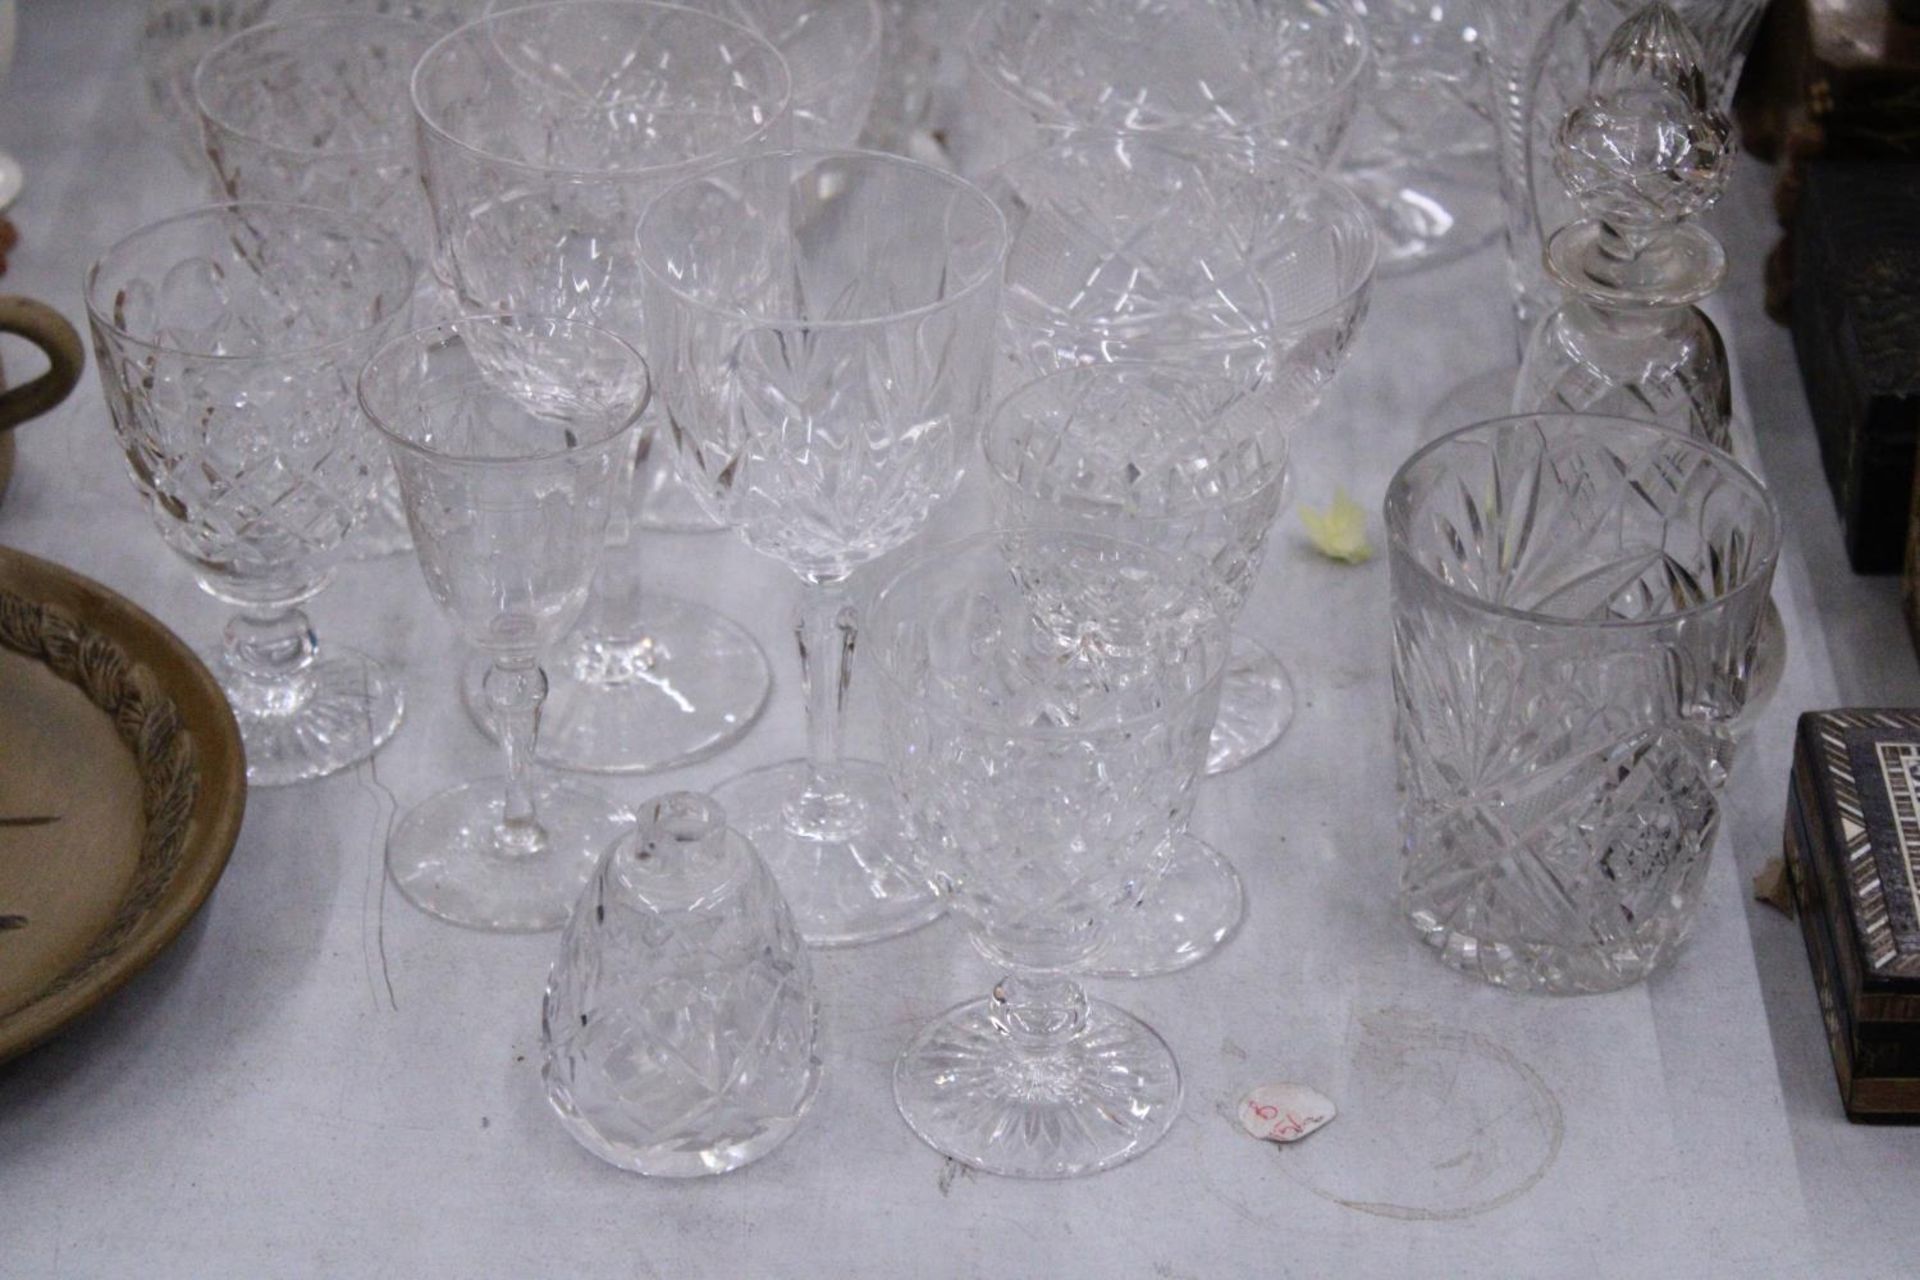 A LARGE QUANTITY OF GLASSWARE TO INCLUDE BOWLS, VASES, WINE GLASSES, ETC - Image 2 of 6